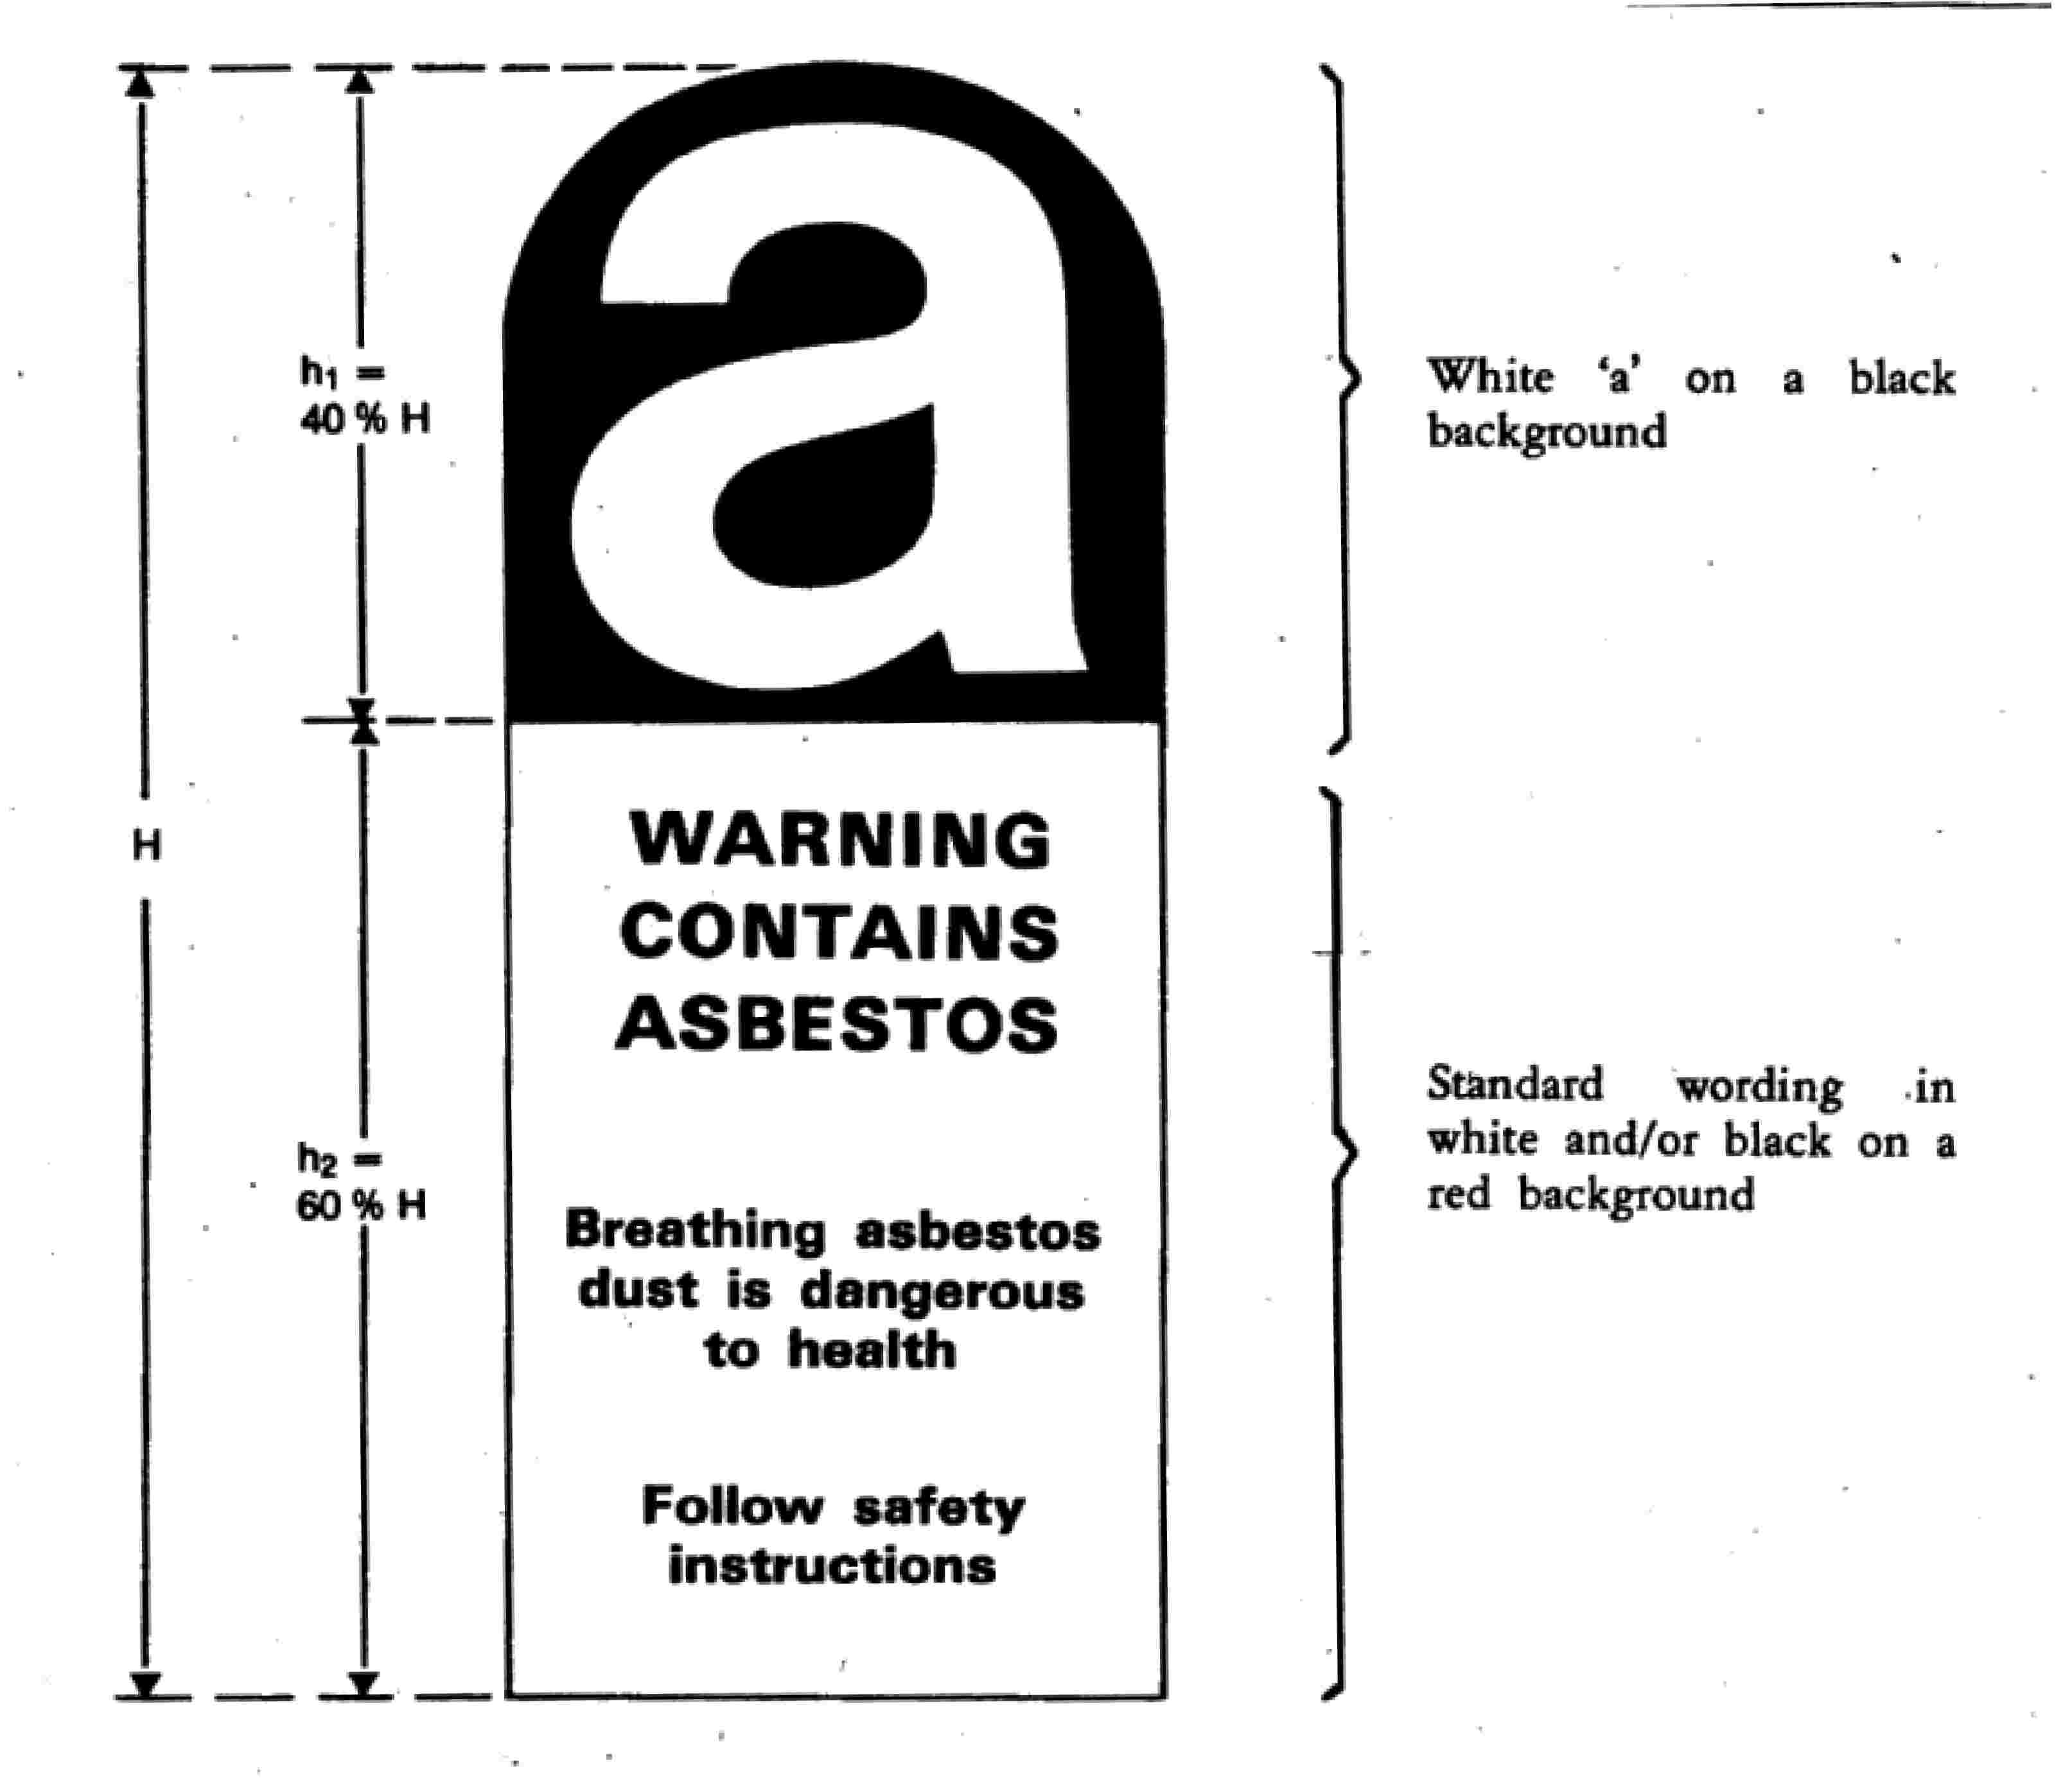 h1 = 40 % HaWhite ‘a’ on a black backgroundHWARNING CONTAINS ASBESTOSStandard wording in white and/or black on a red backgroundh2 = 60 % HBreathing asbestos dust is dangerous to healthFollow safety instructions